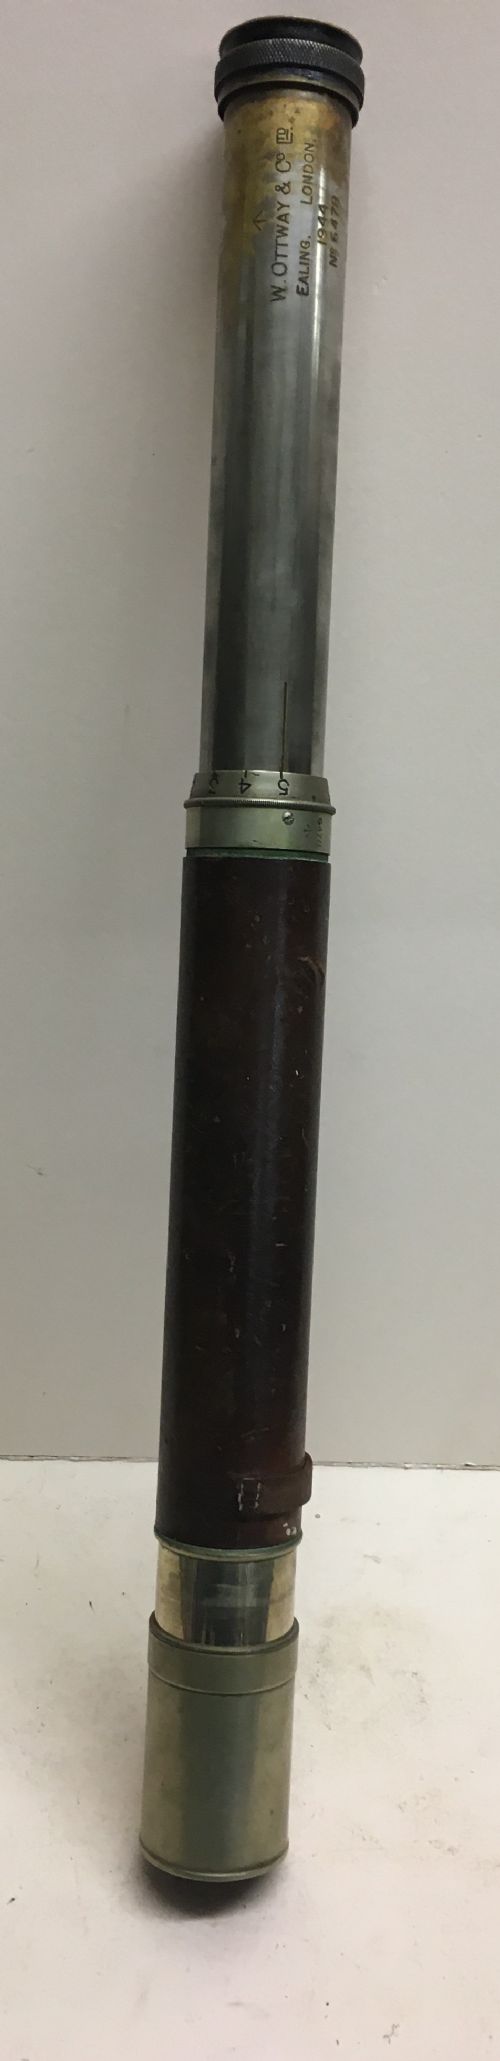 a collimating telescope by ottawa and co ealing london